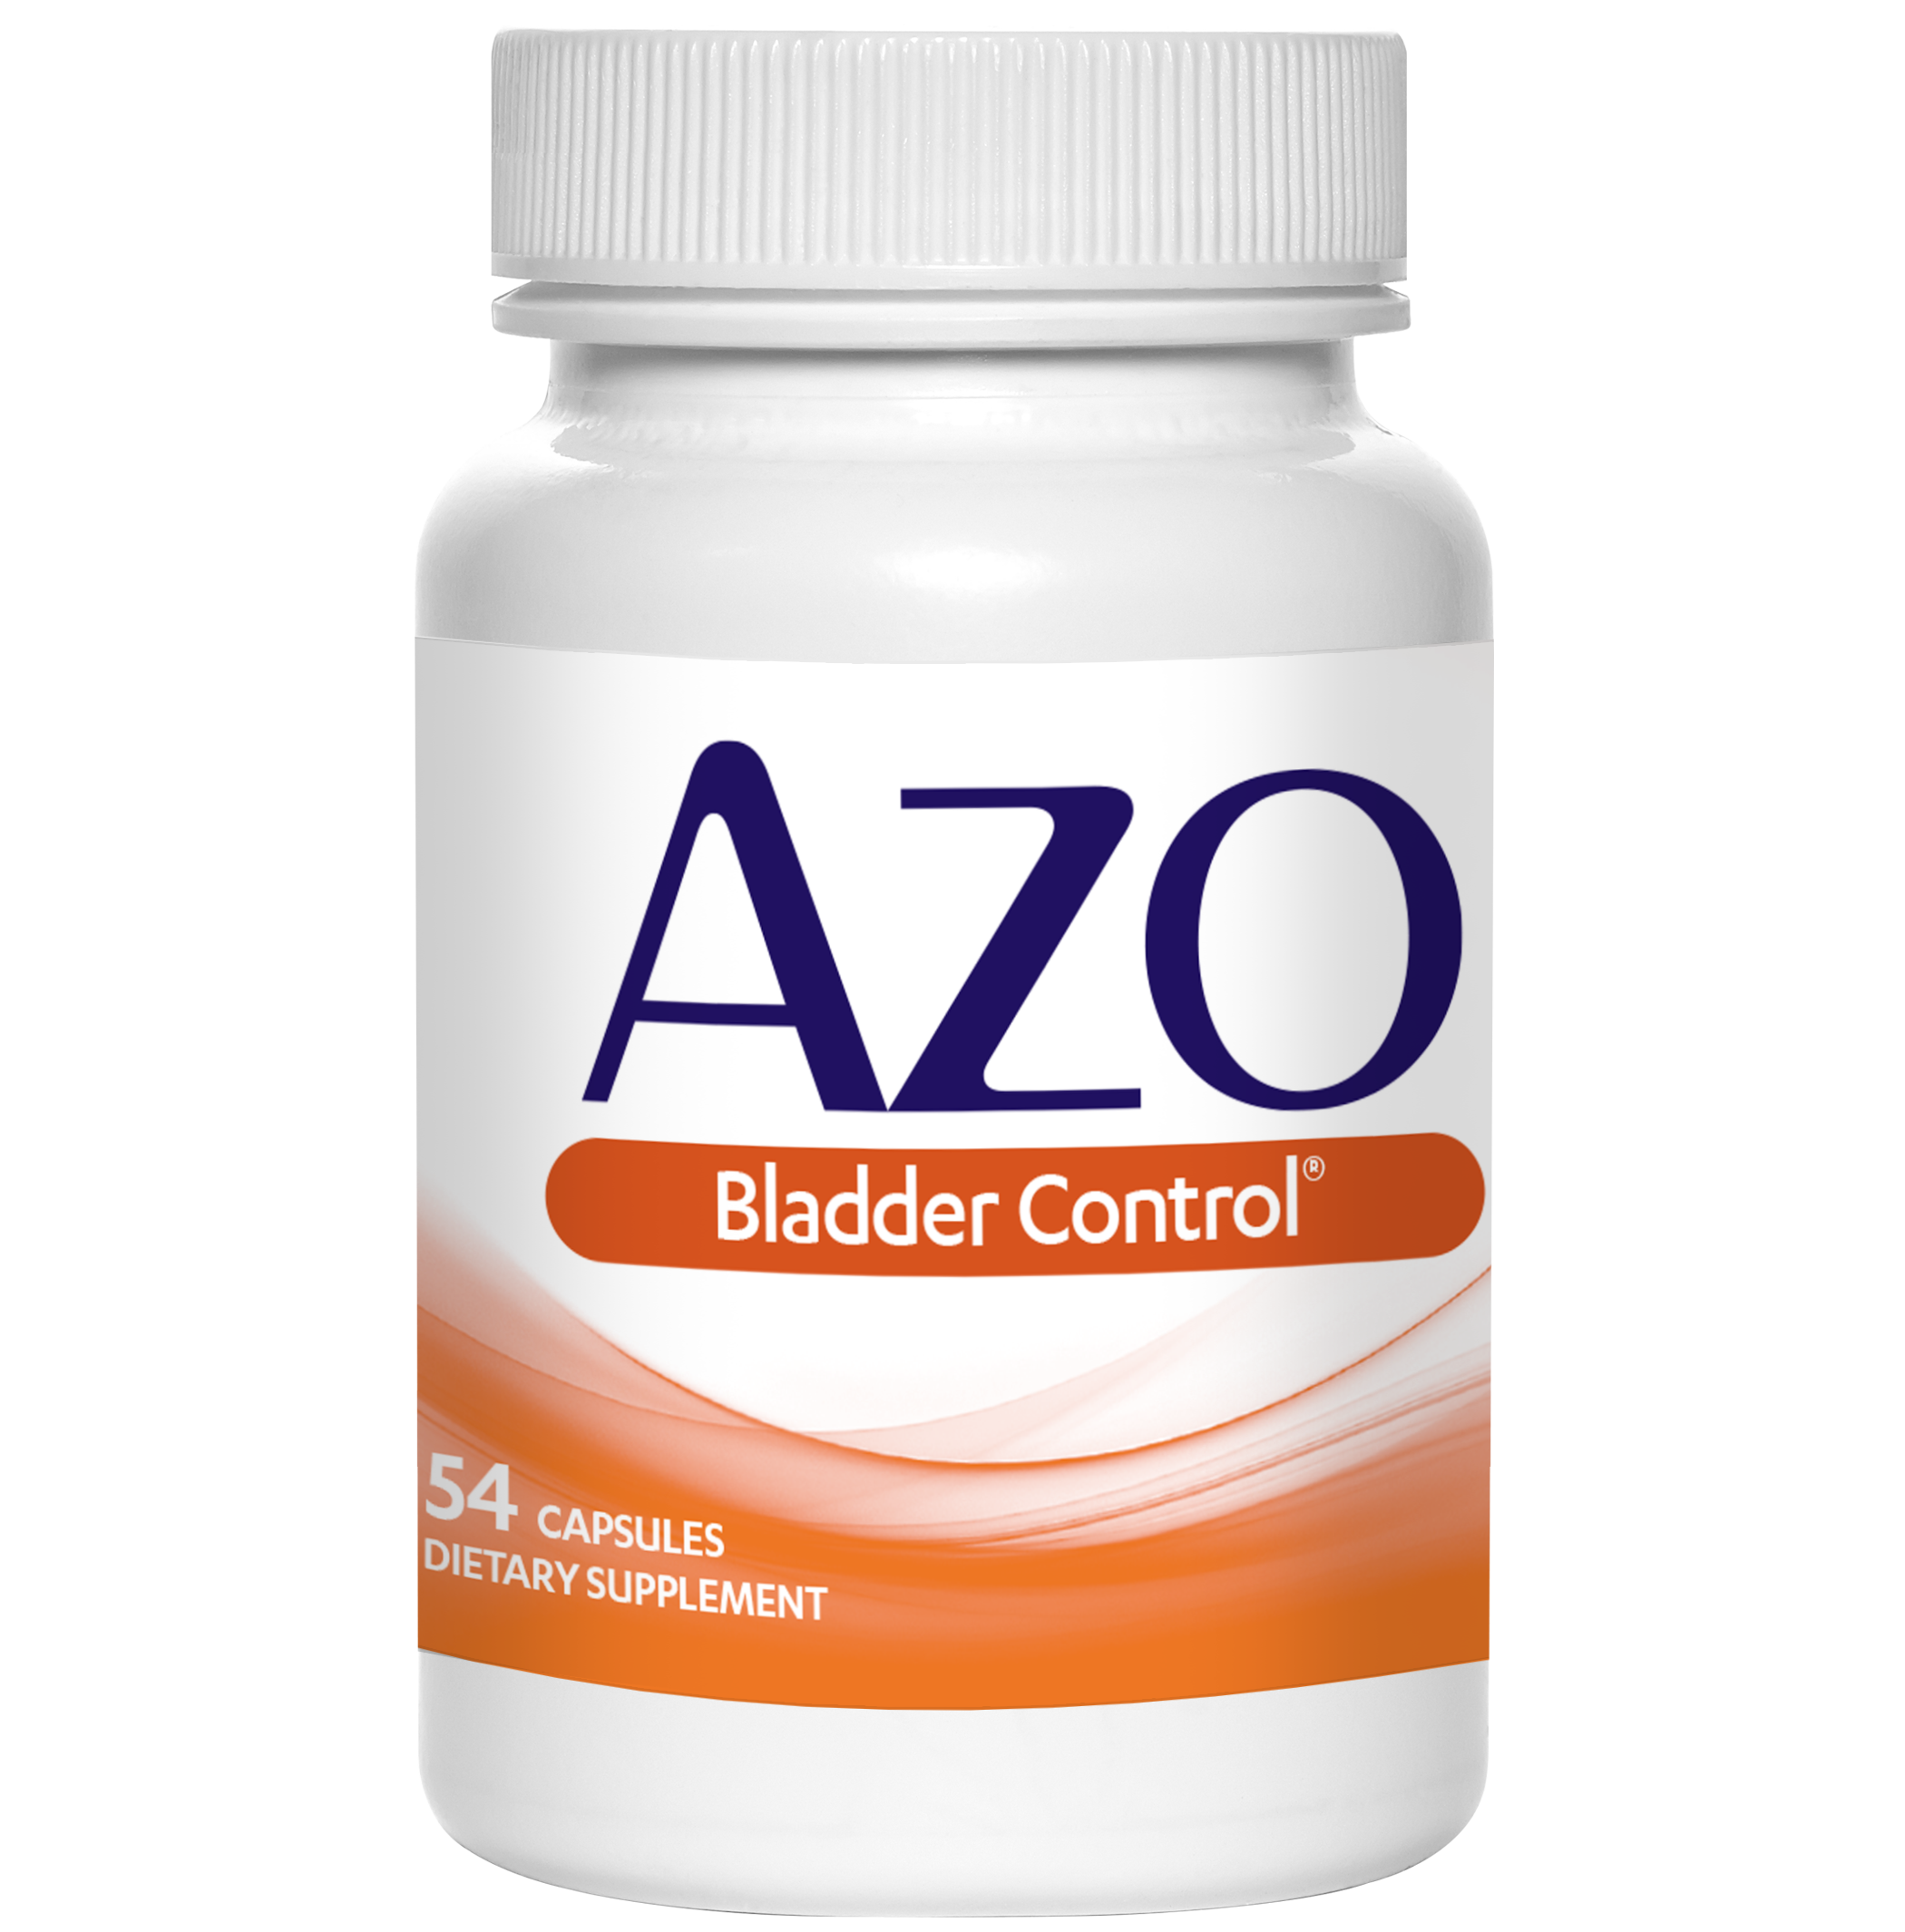 AZO Bladder Control with Go-Less Daily Supplement, Reduces Urgency and Leakage*, 54 Capsules - image 3 of 10